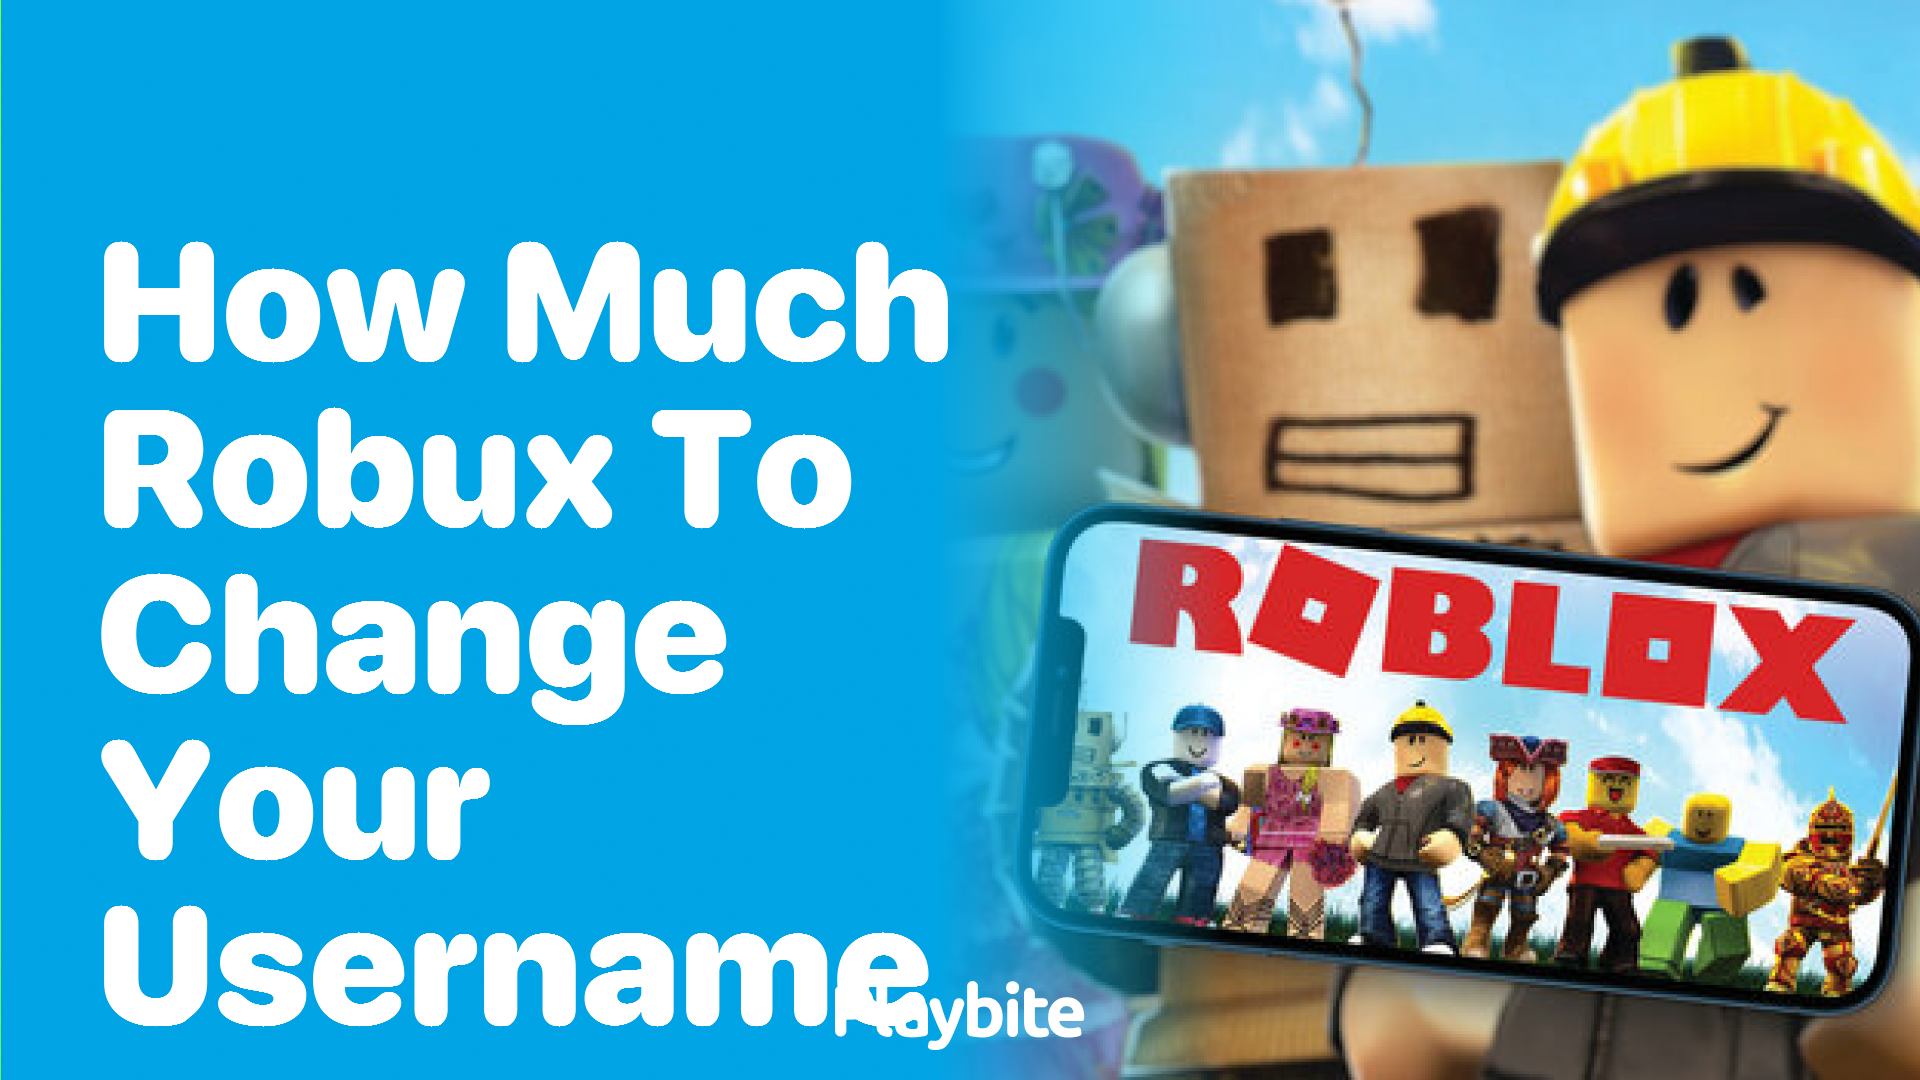 How Much Robux Do You Need to Change Your Username?